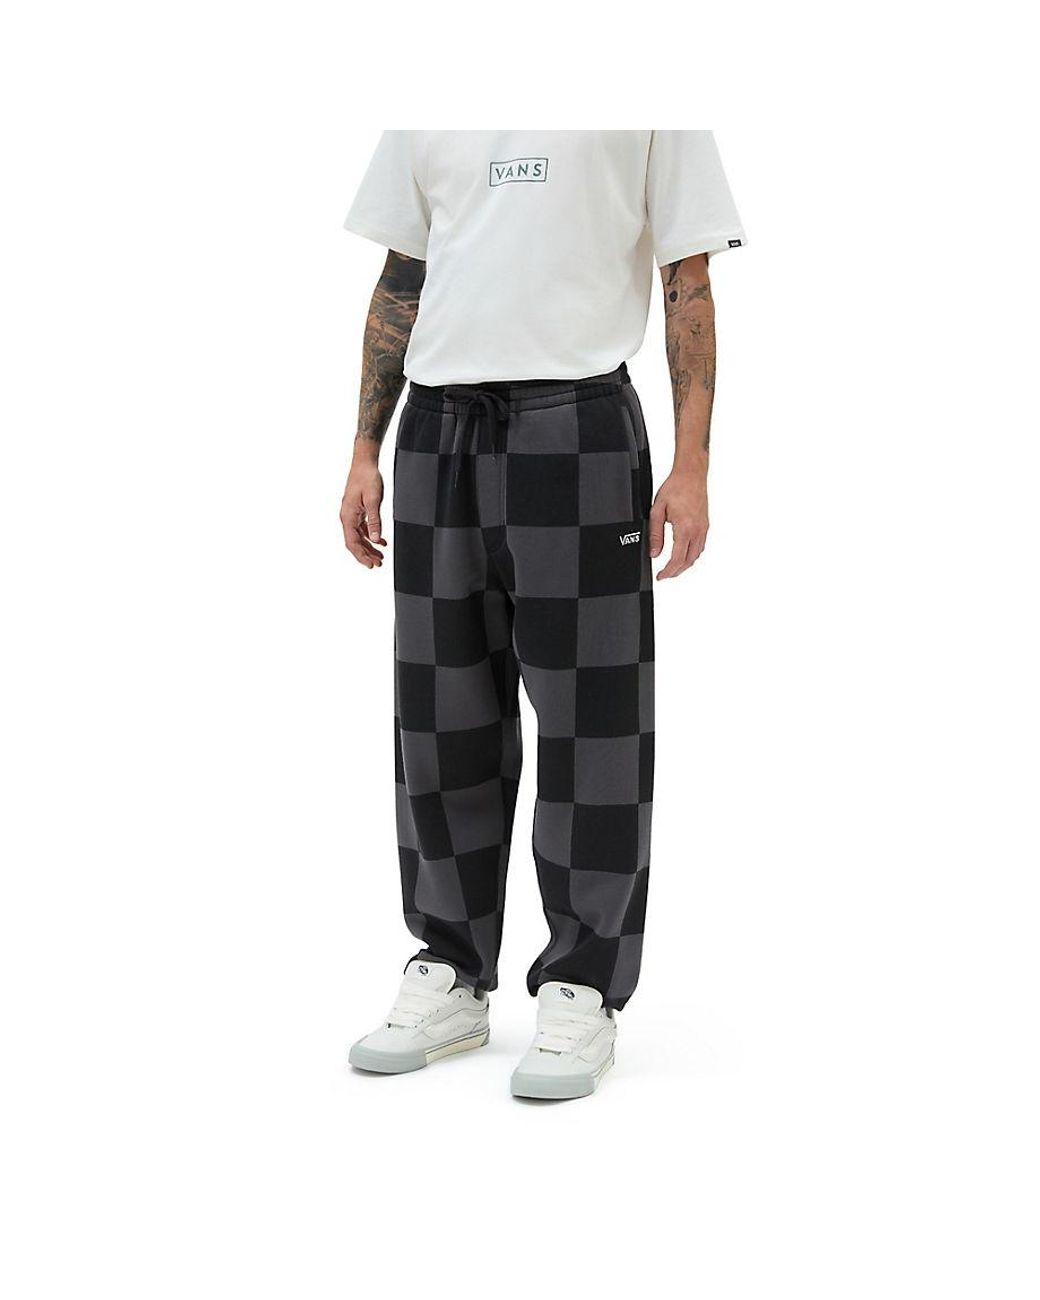 Vans Authentic Chino Pants Wmn (checkerboard)